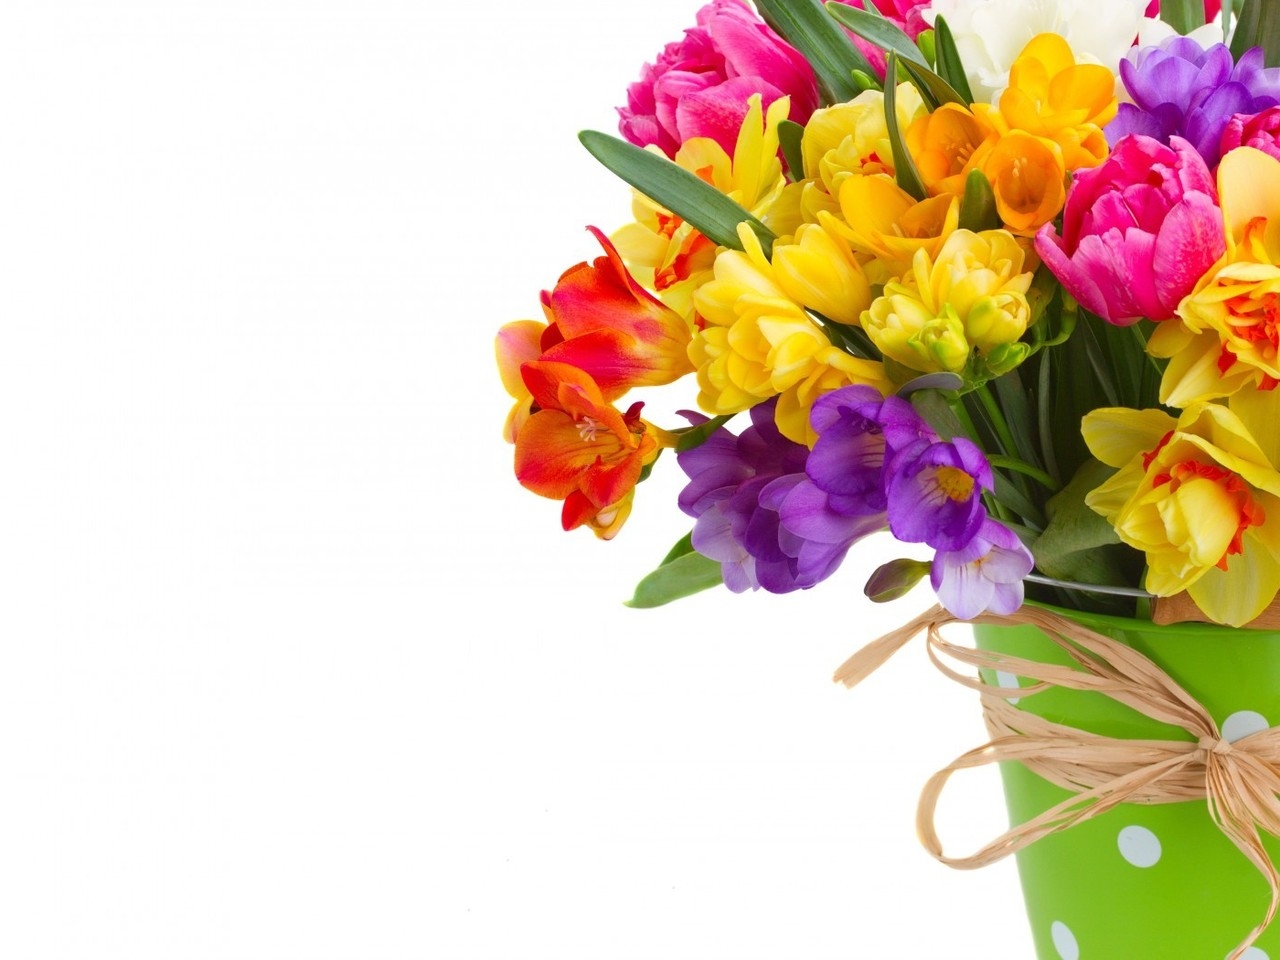 Daffodils and Freesias Bouquet for 1280 x 960 resolution